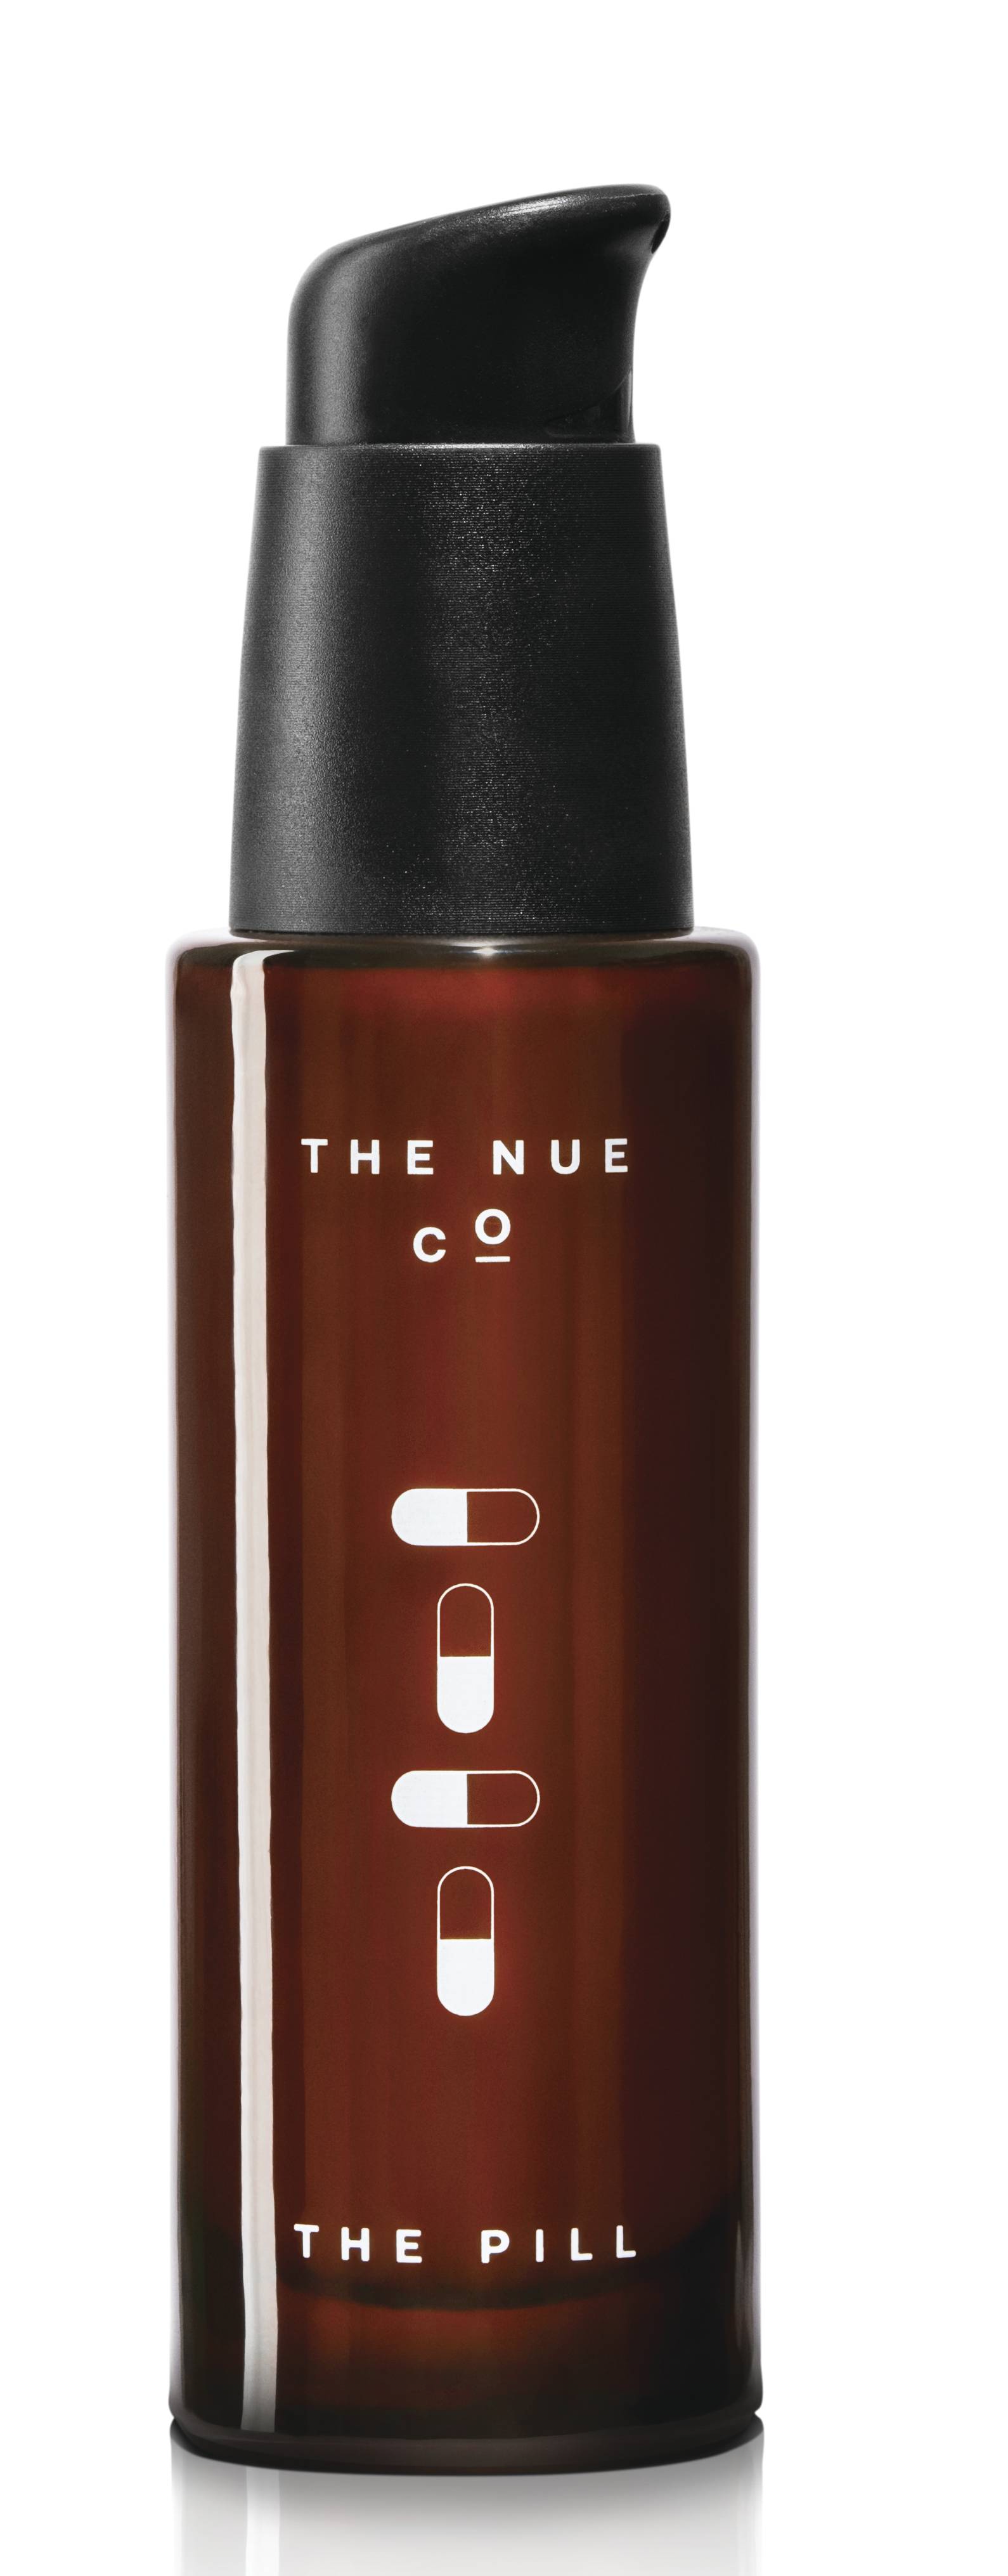 The Pill by The Nue Co Image skin story